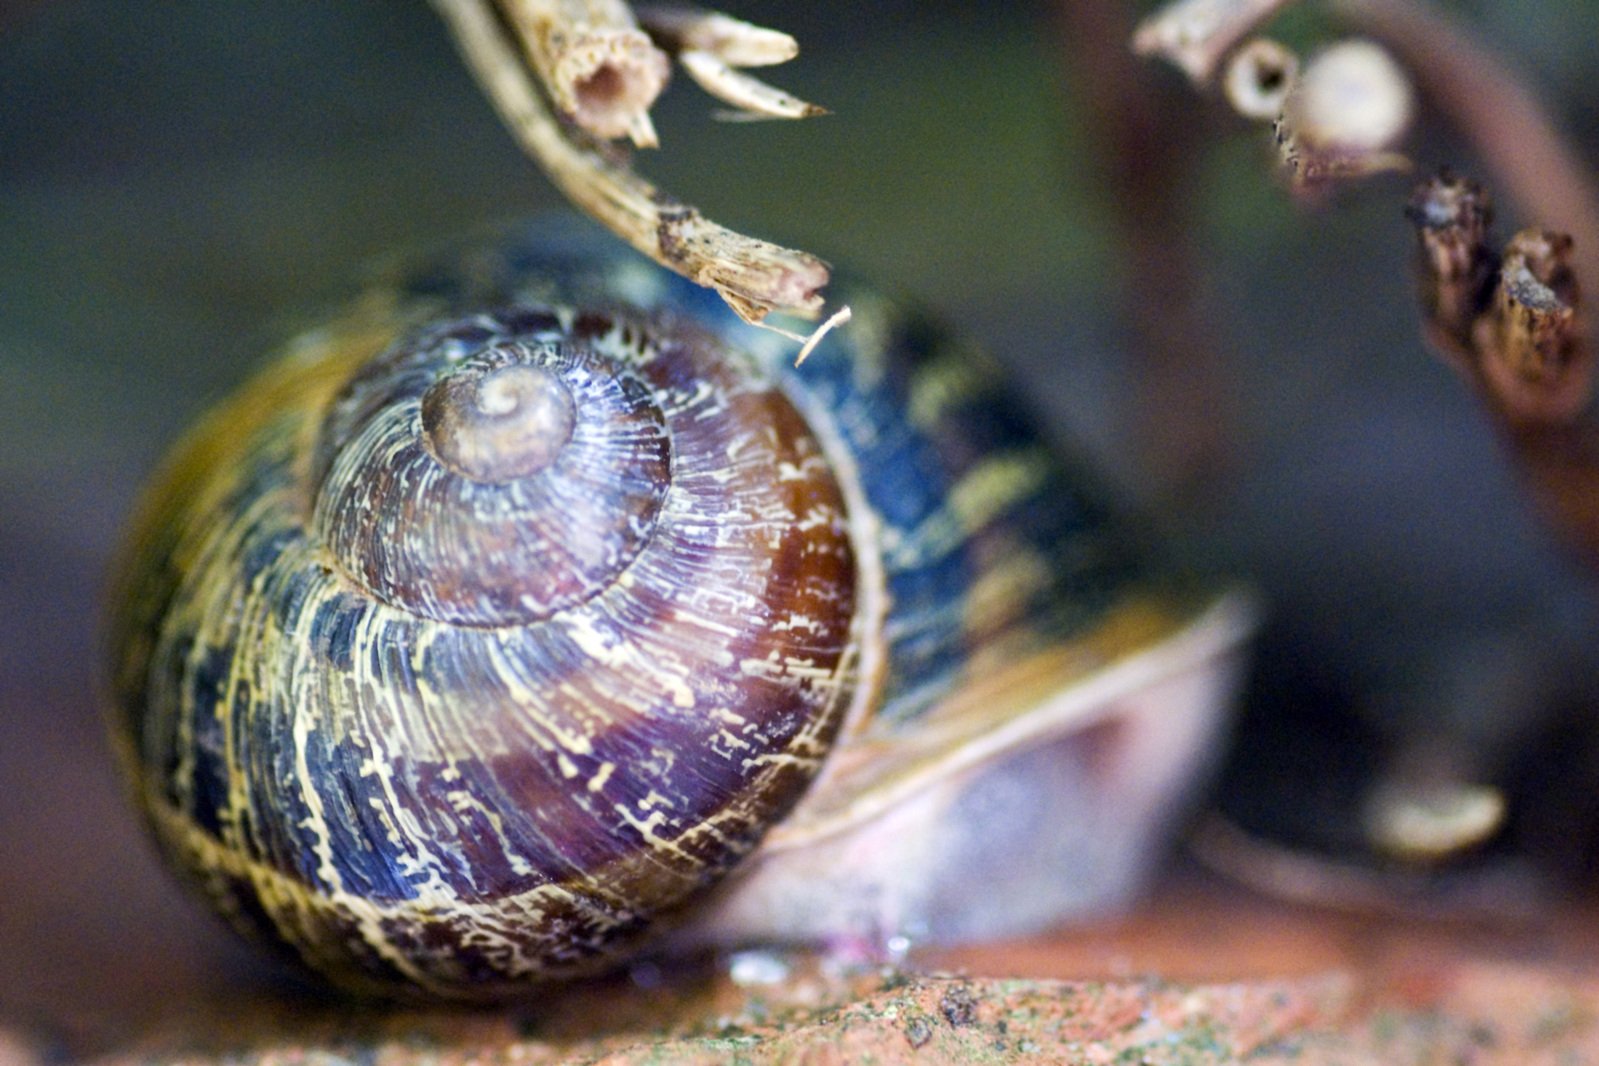 a snail is crawling on some leafy nches